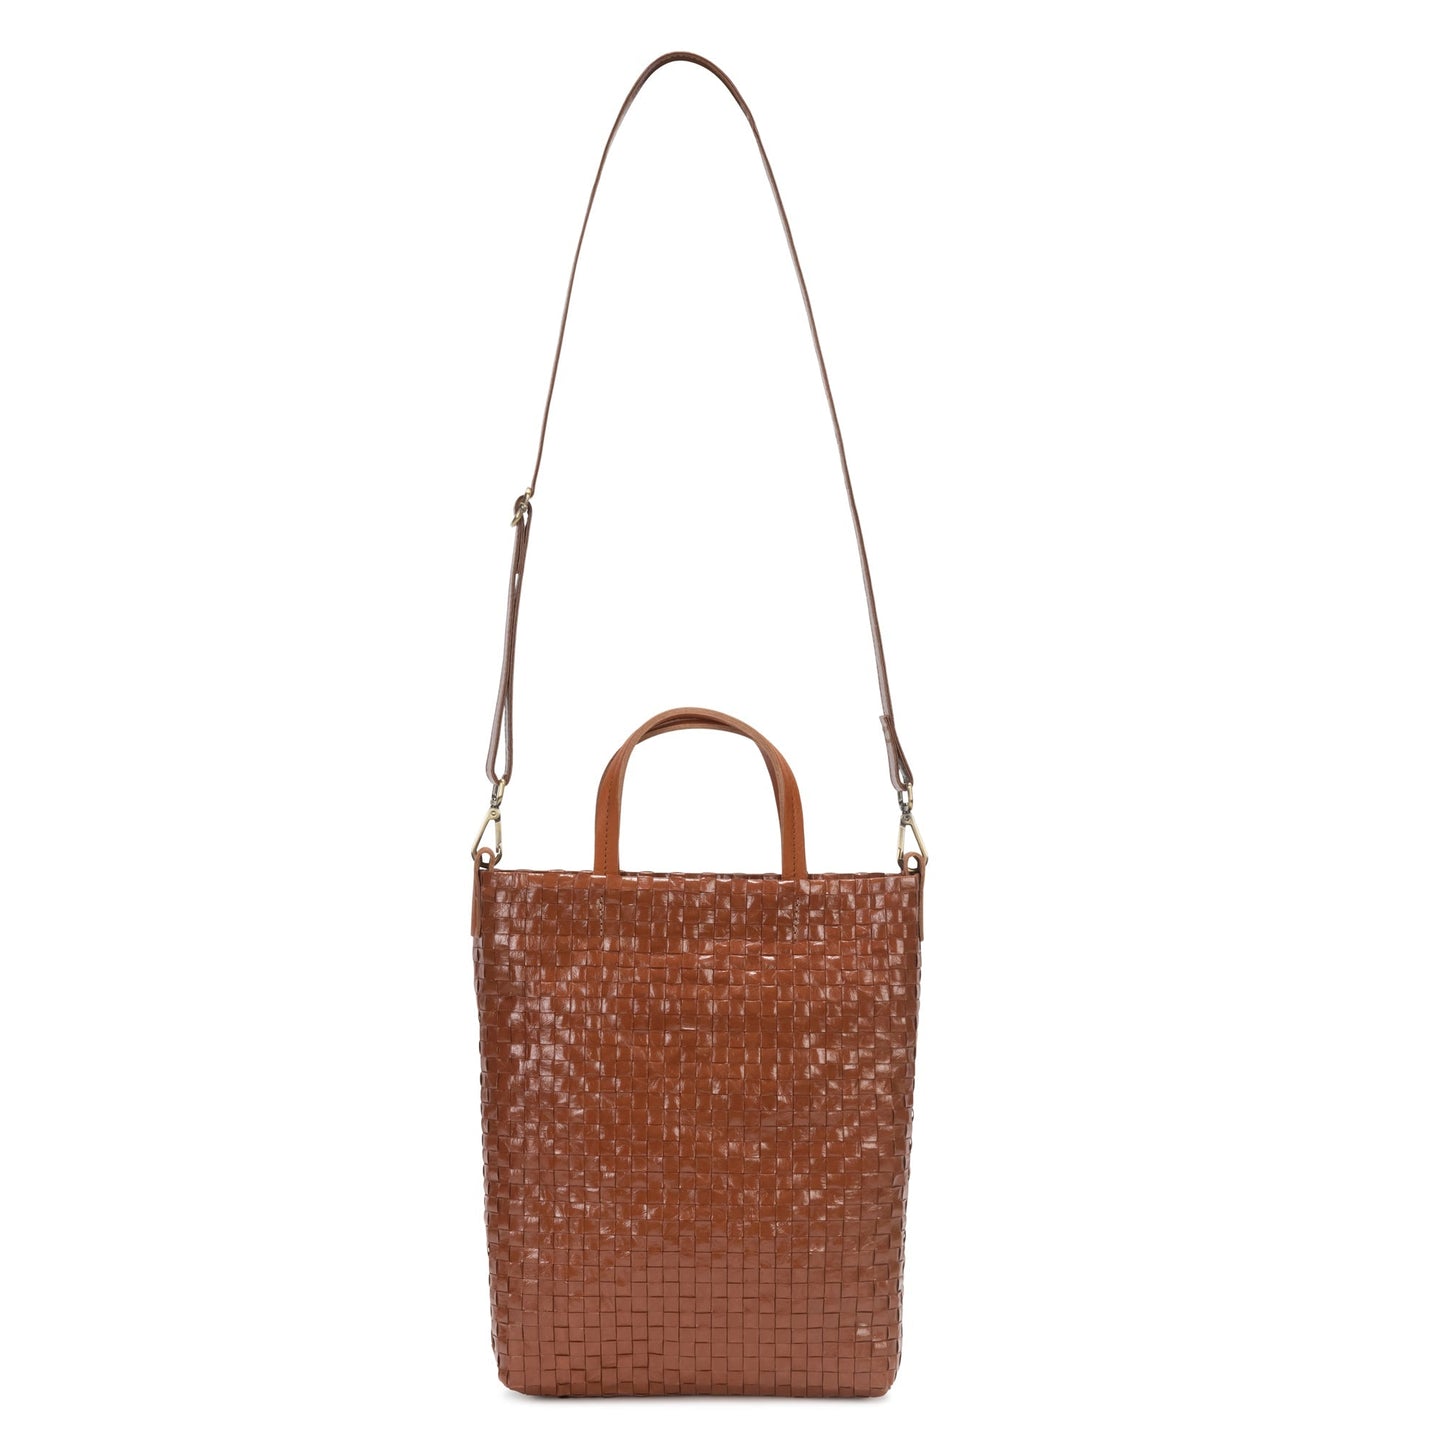 A washable paper tote bag is shown with a long shoulder strap and two top handles. The fabric is woven and it is brown in colour.